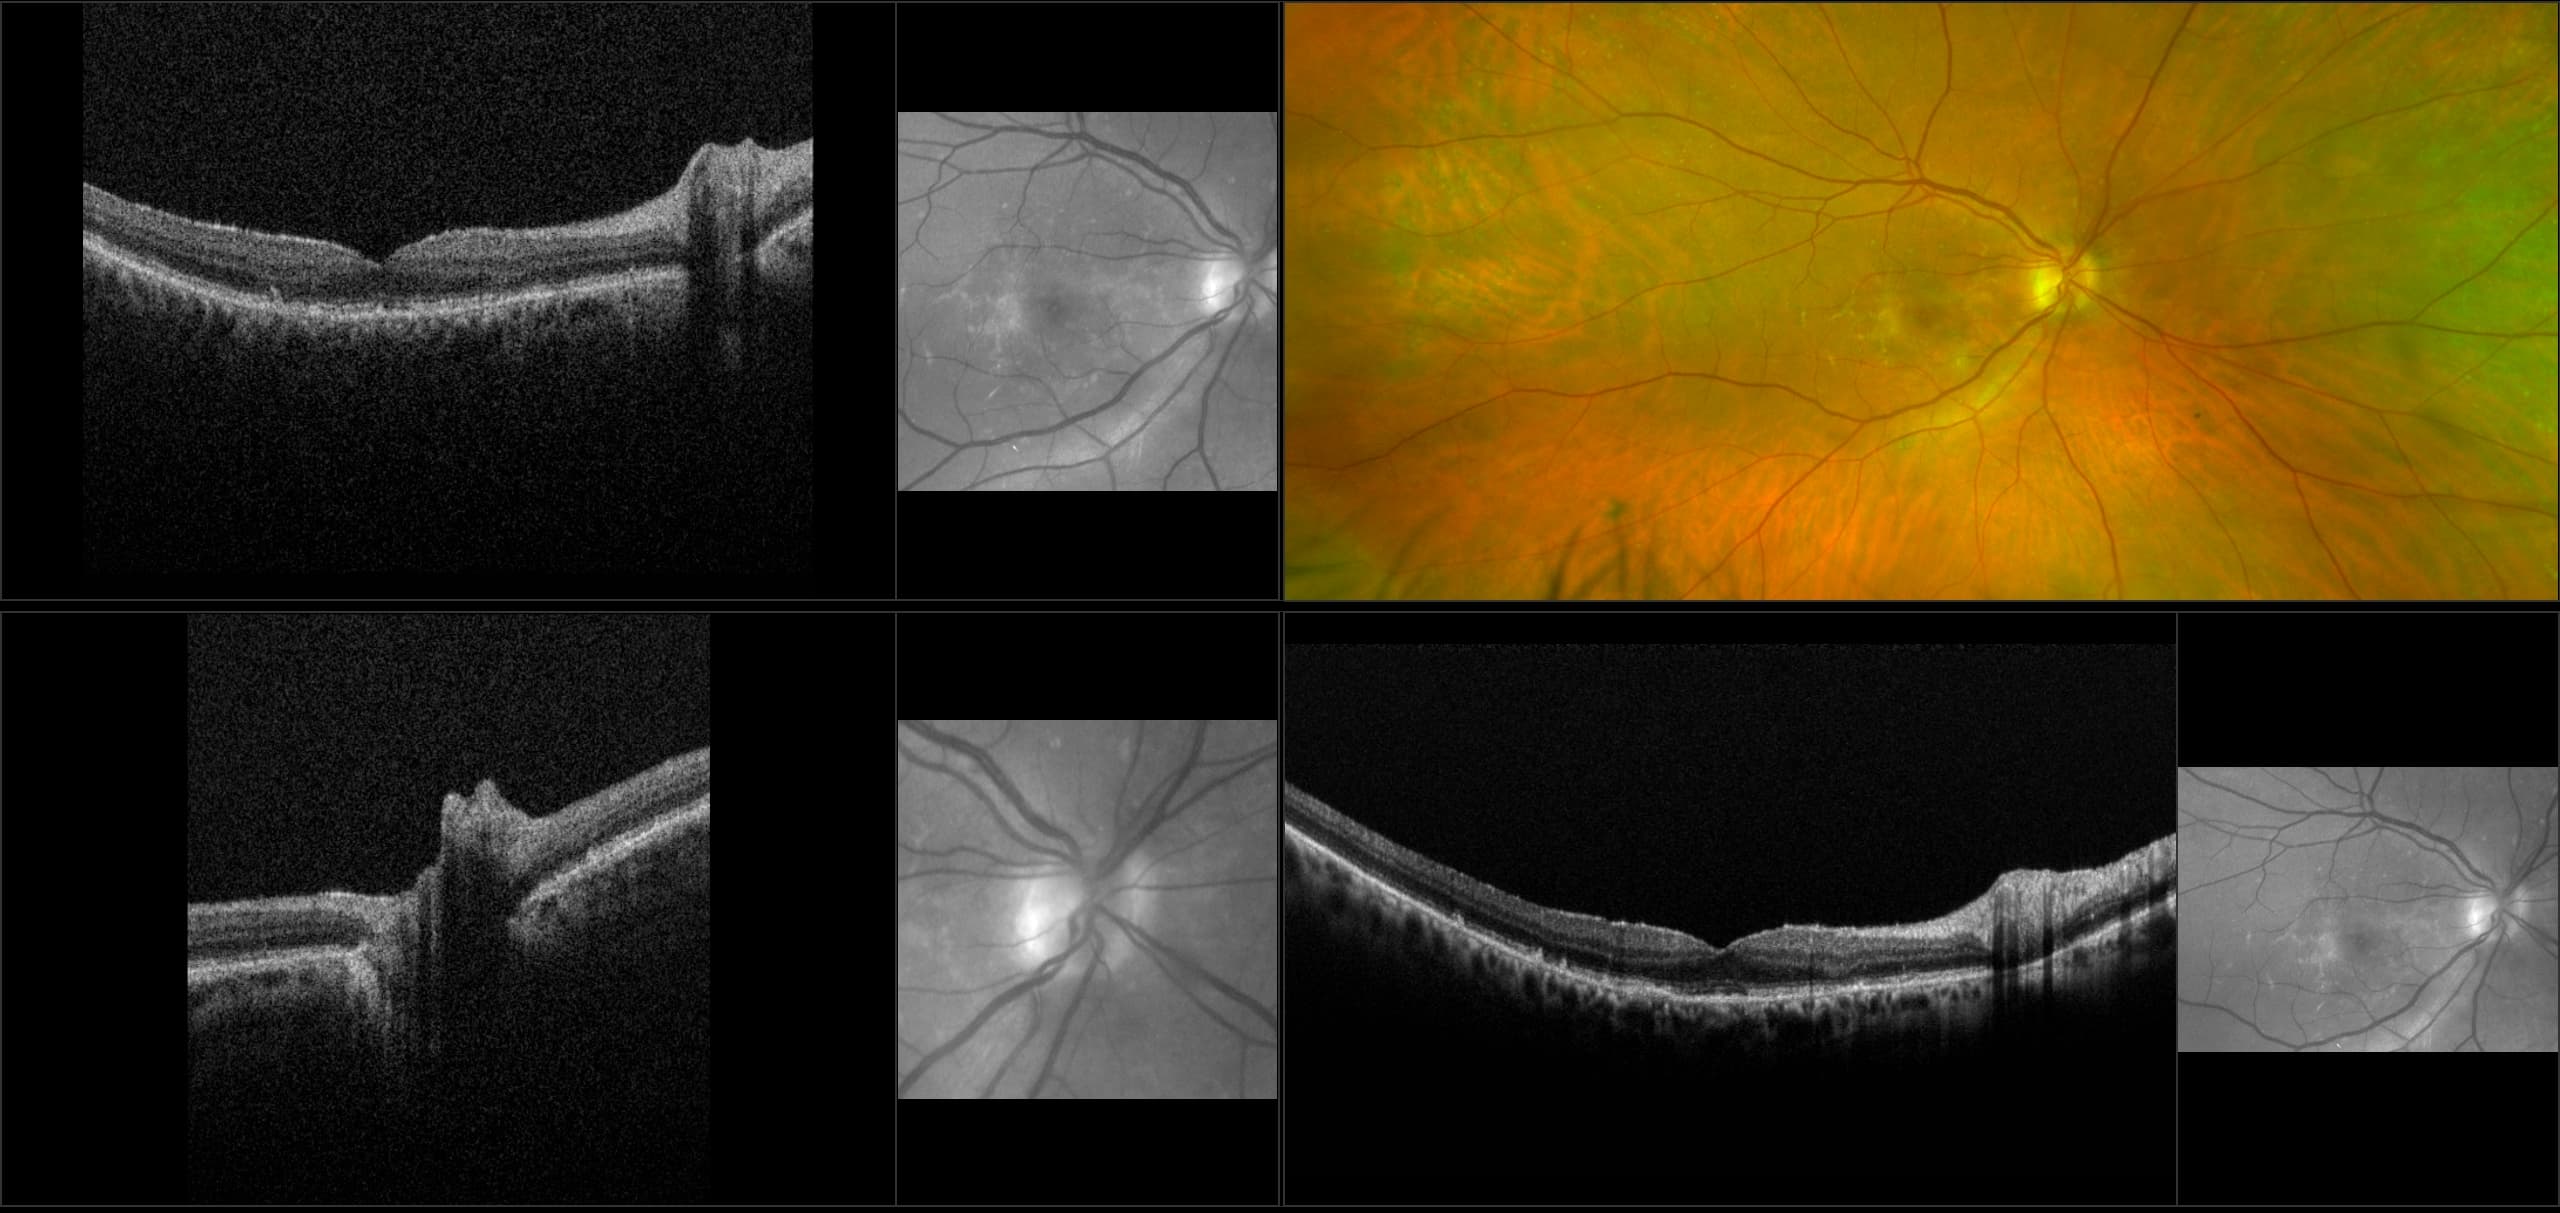 Monaco - Wet AMD with Drusen and PVD, RG, OCT